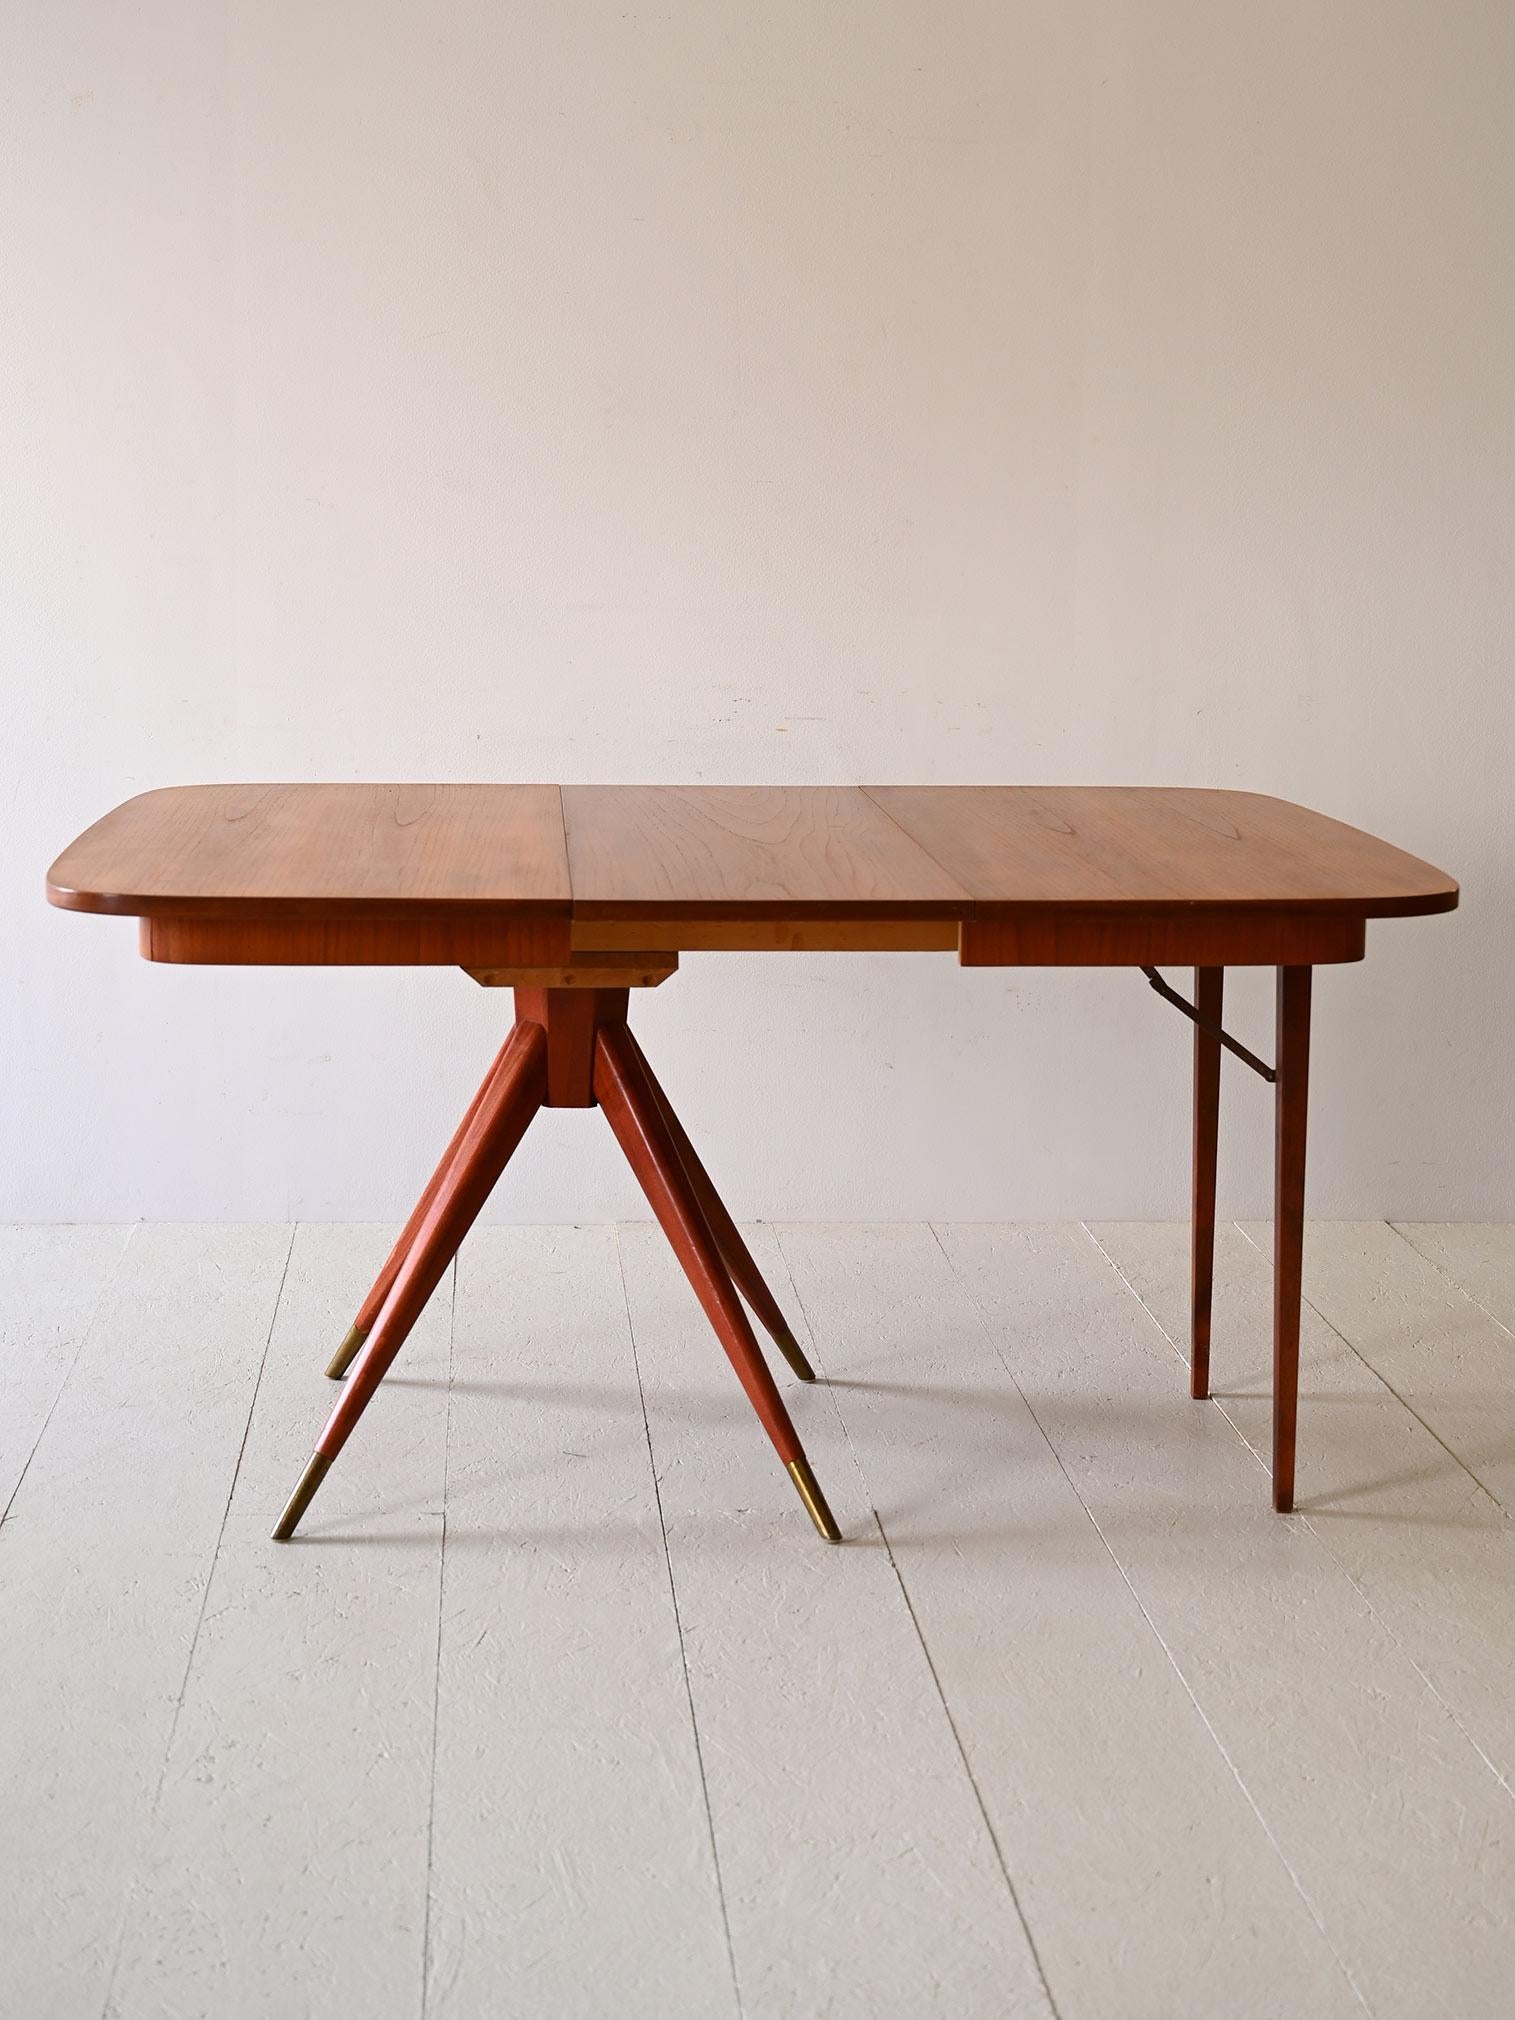 Teak Square table with rounded corners